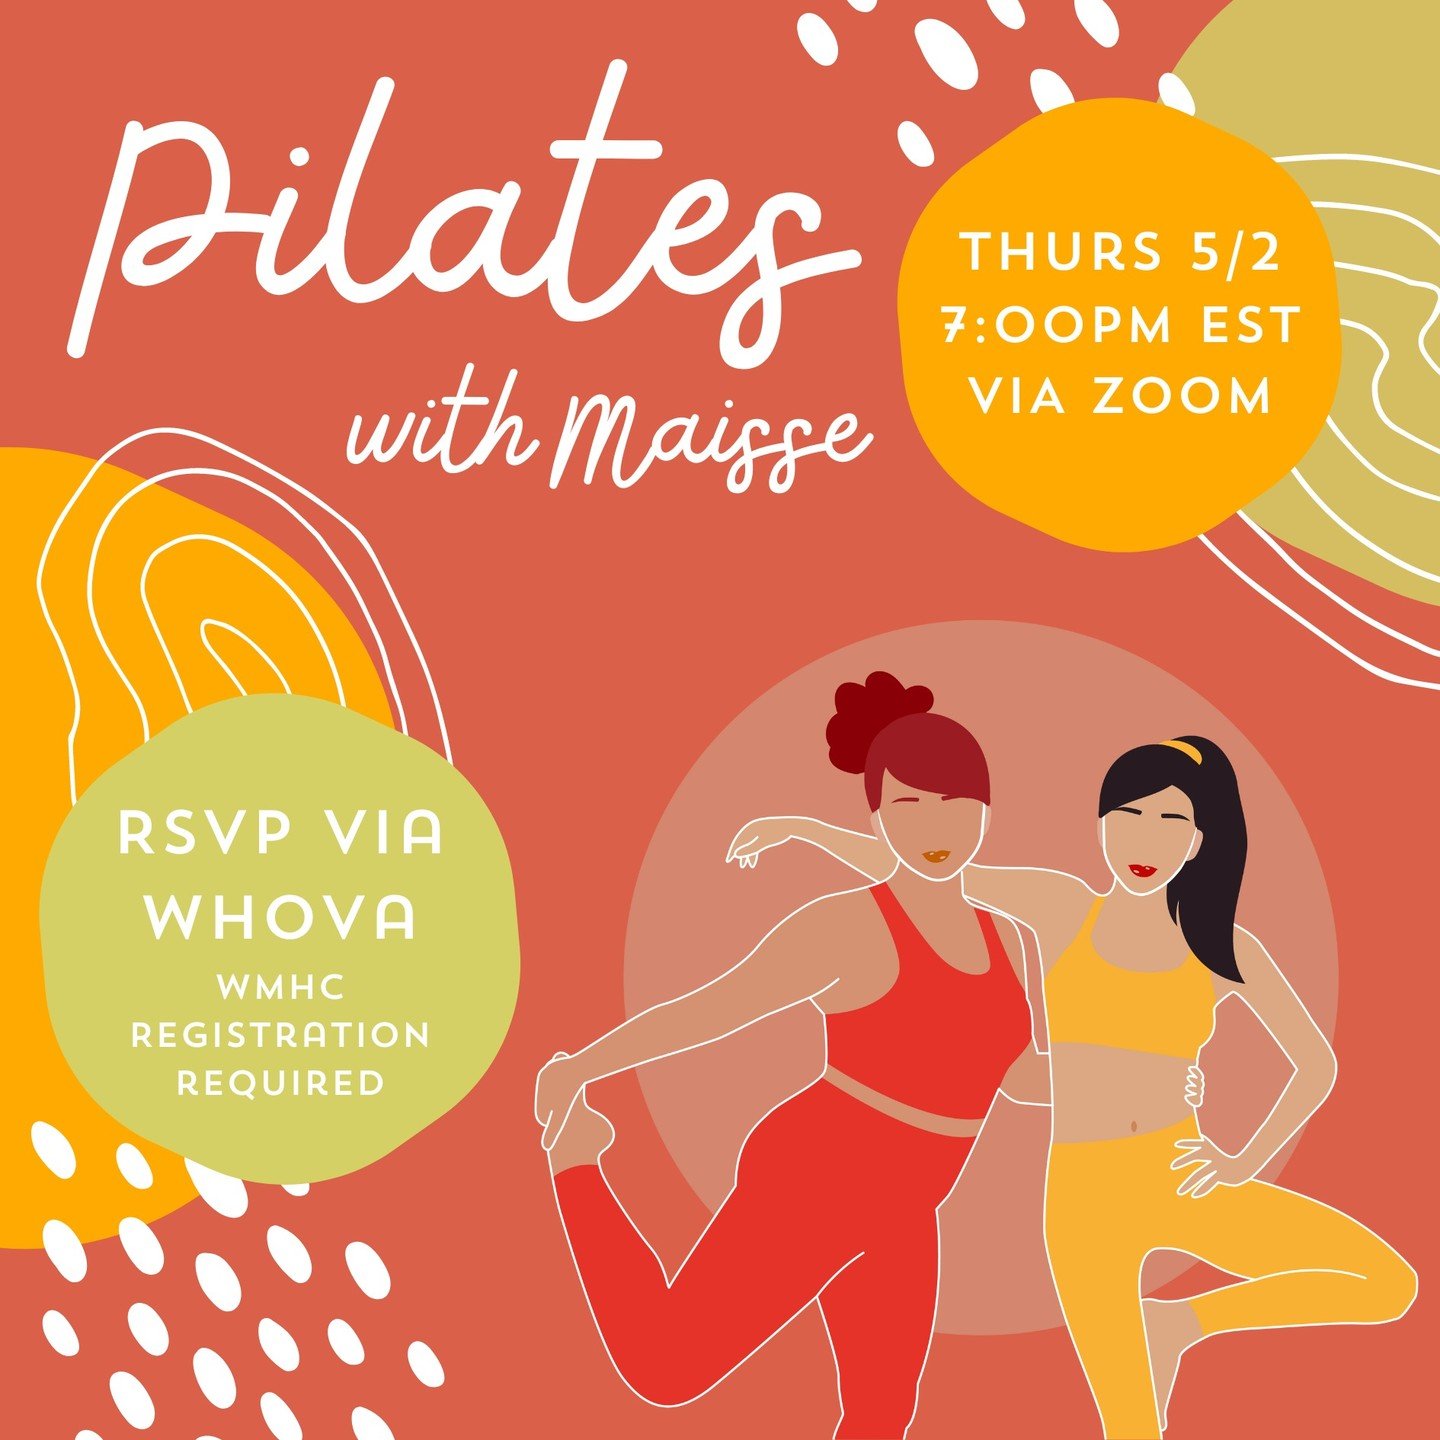 We are counting down the days until WMHC2024...so why not kick things off a little early with some movement!

This Thursday at 7pm EST, join us for mat Pilates with instructor Matisse Madden. Class will be available via zoom through our conference pl